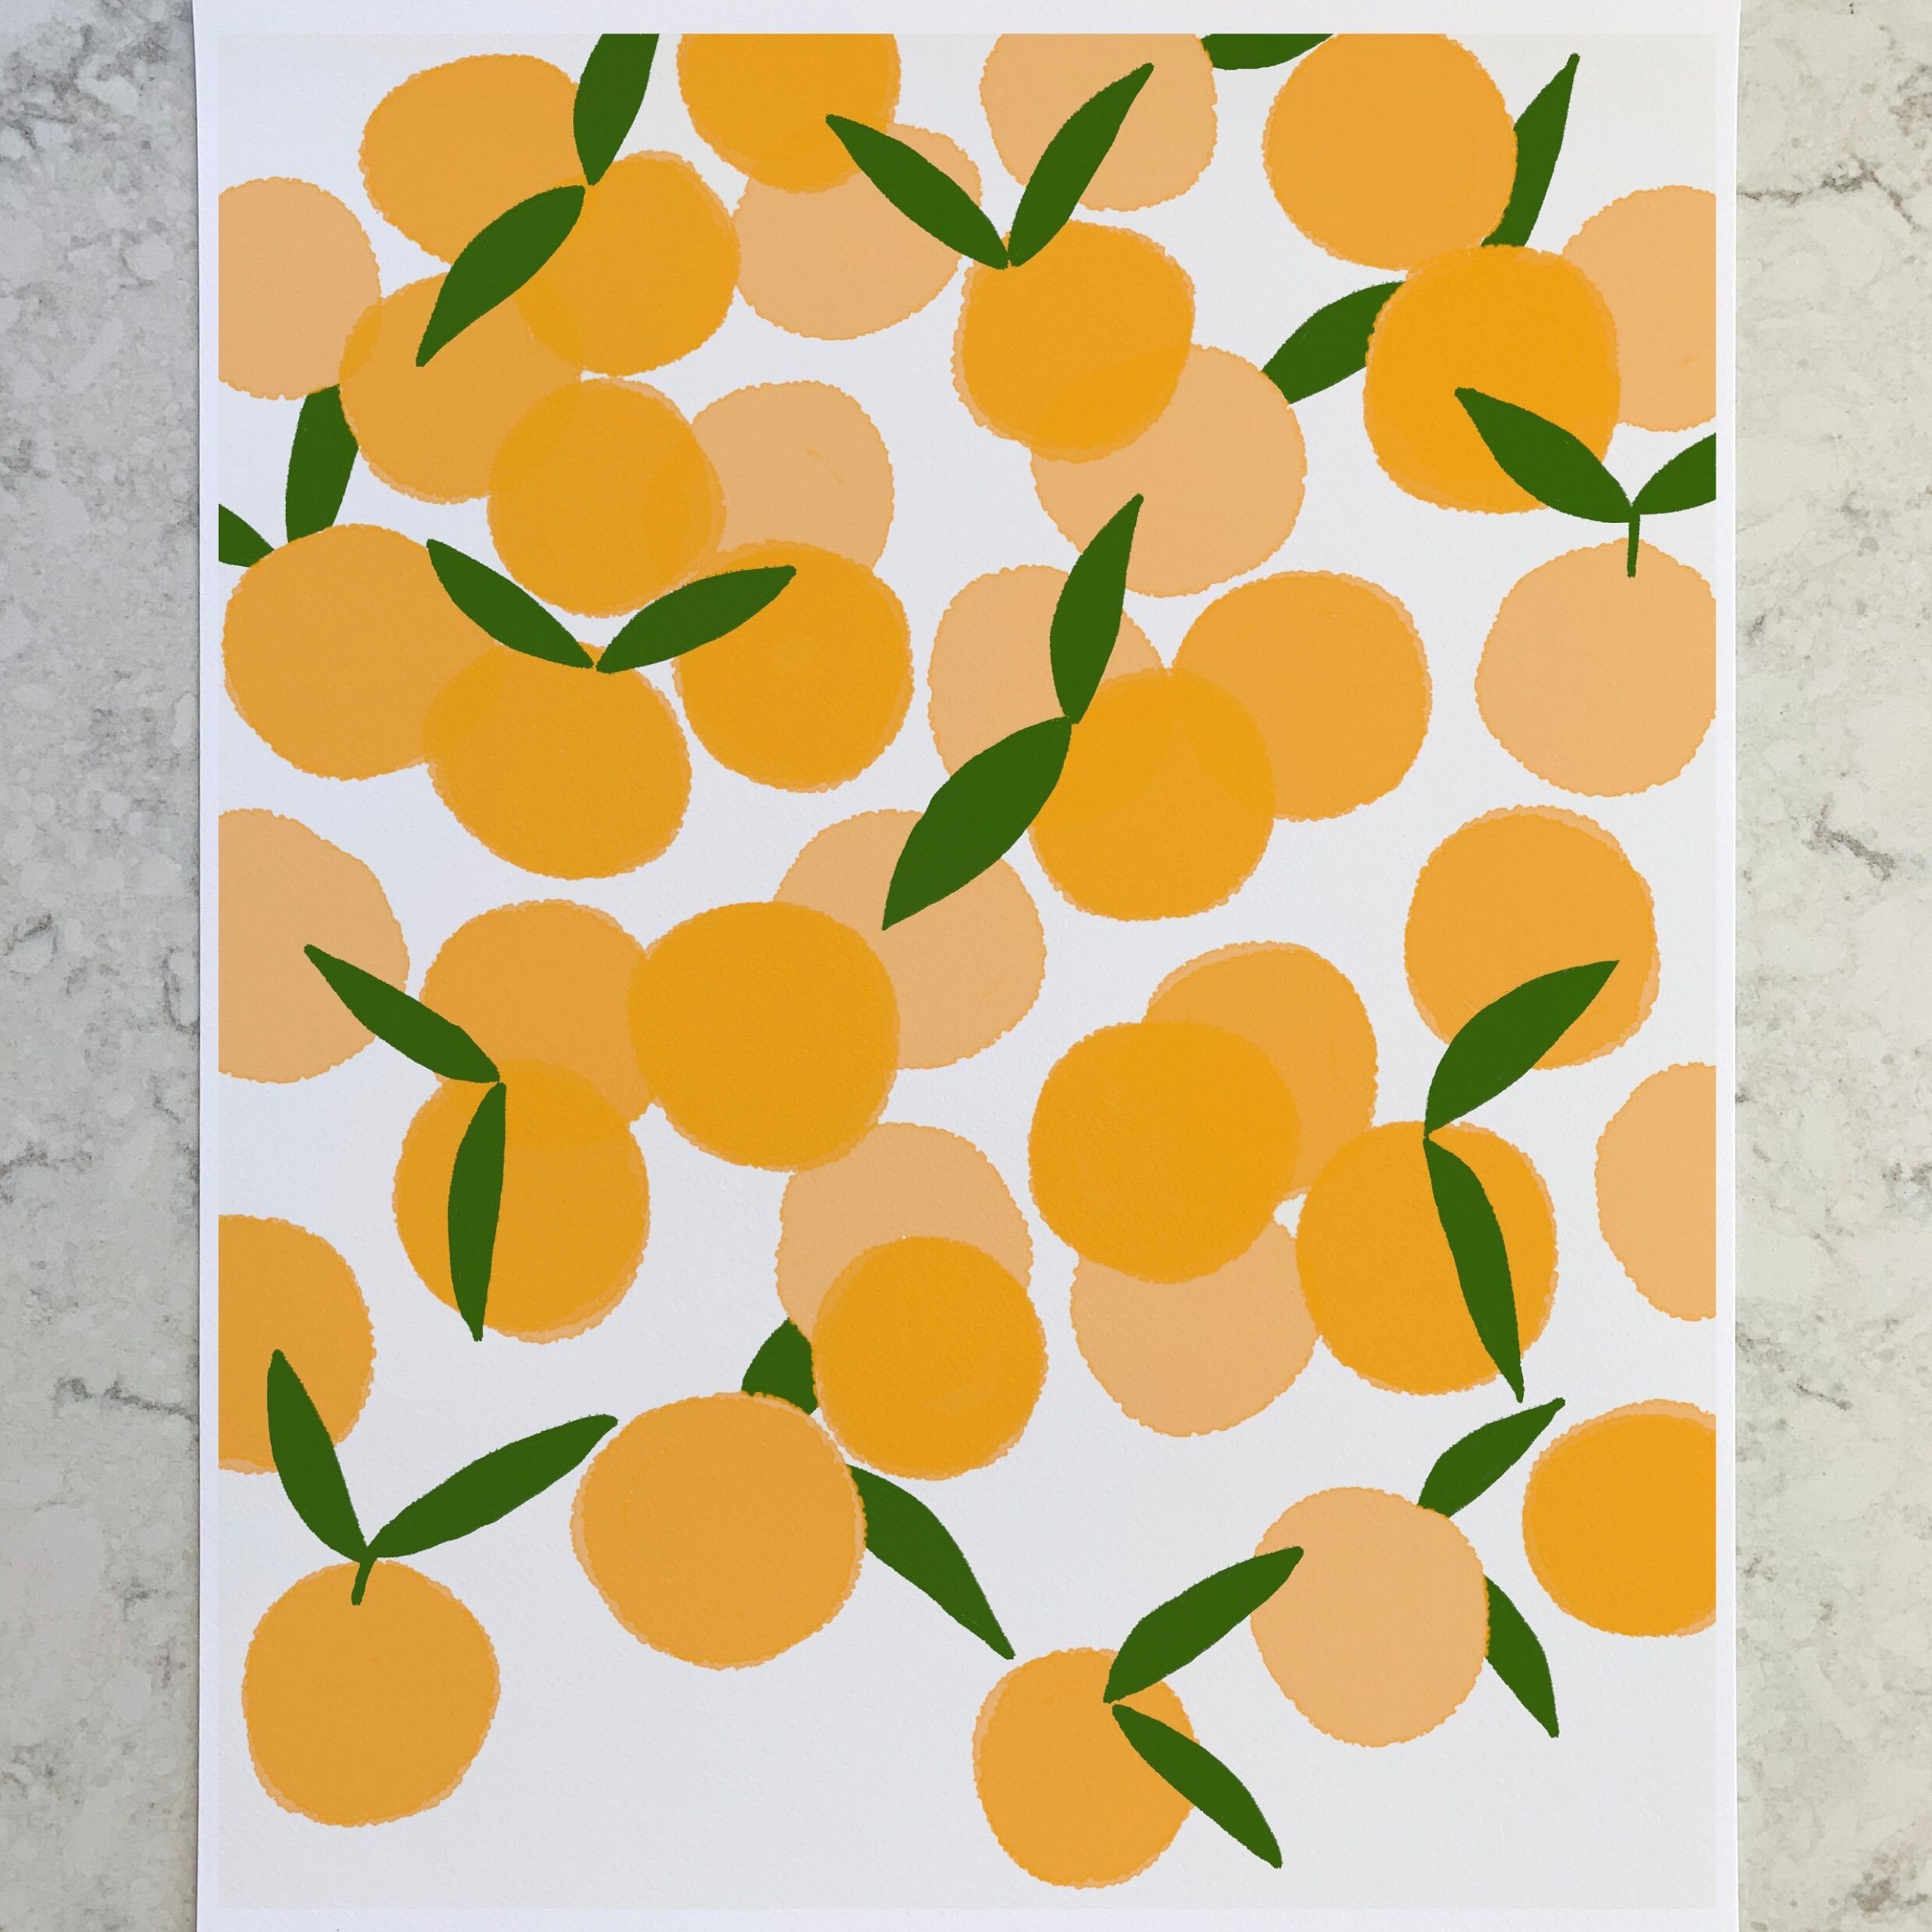 Clementines Fruit Art Print. Signé (View 15 of 15)